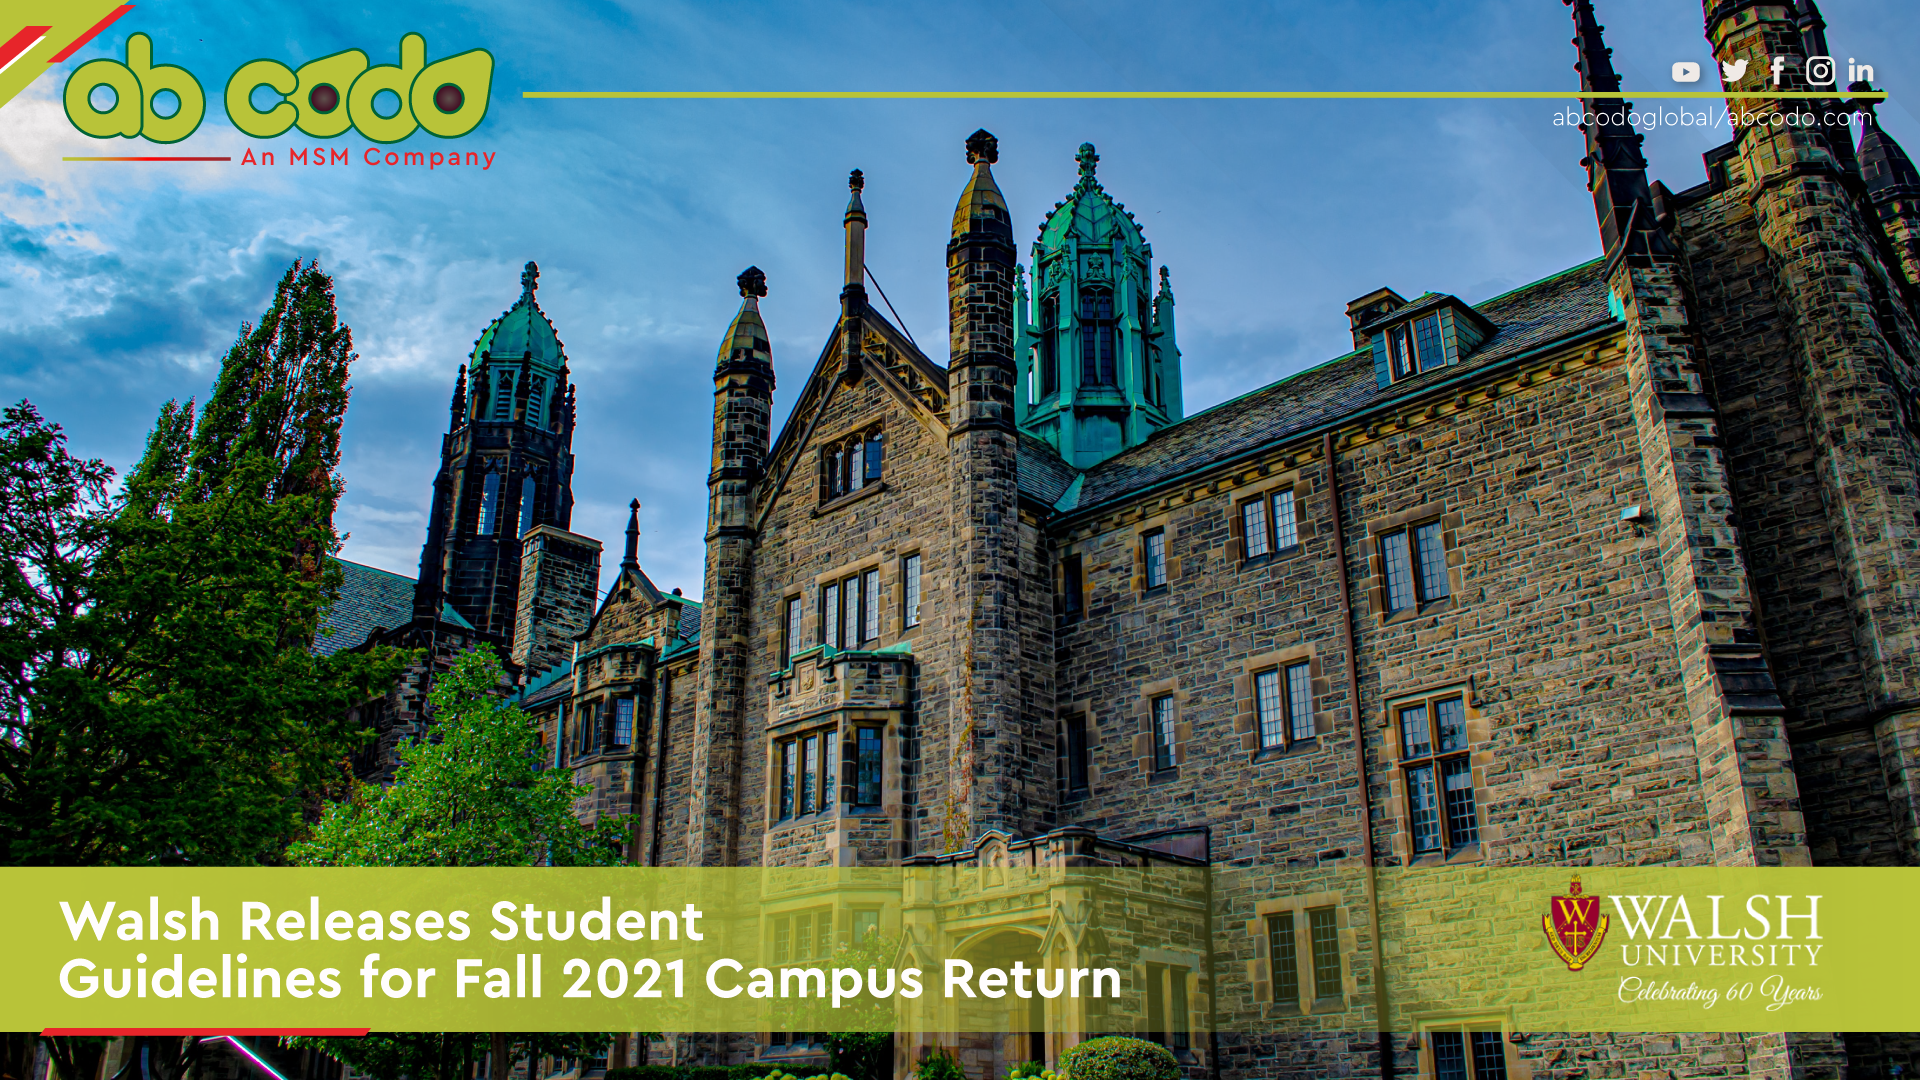 Walsh Releases Student Guidelines for Fall 2021 Campus Return